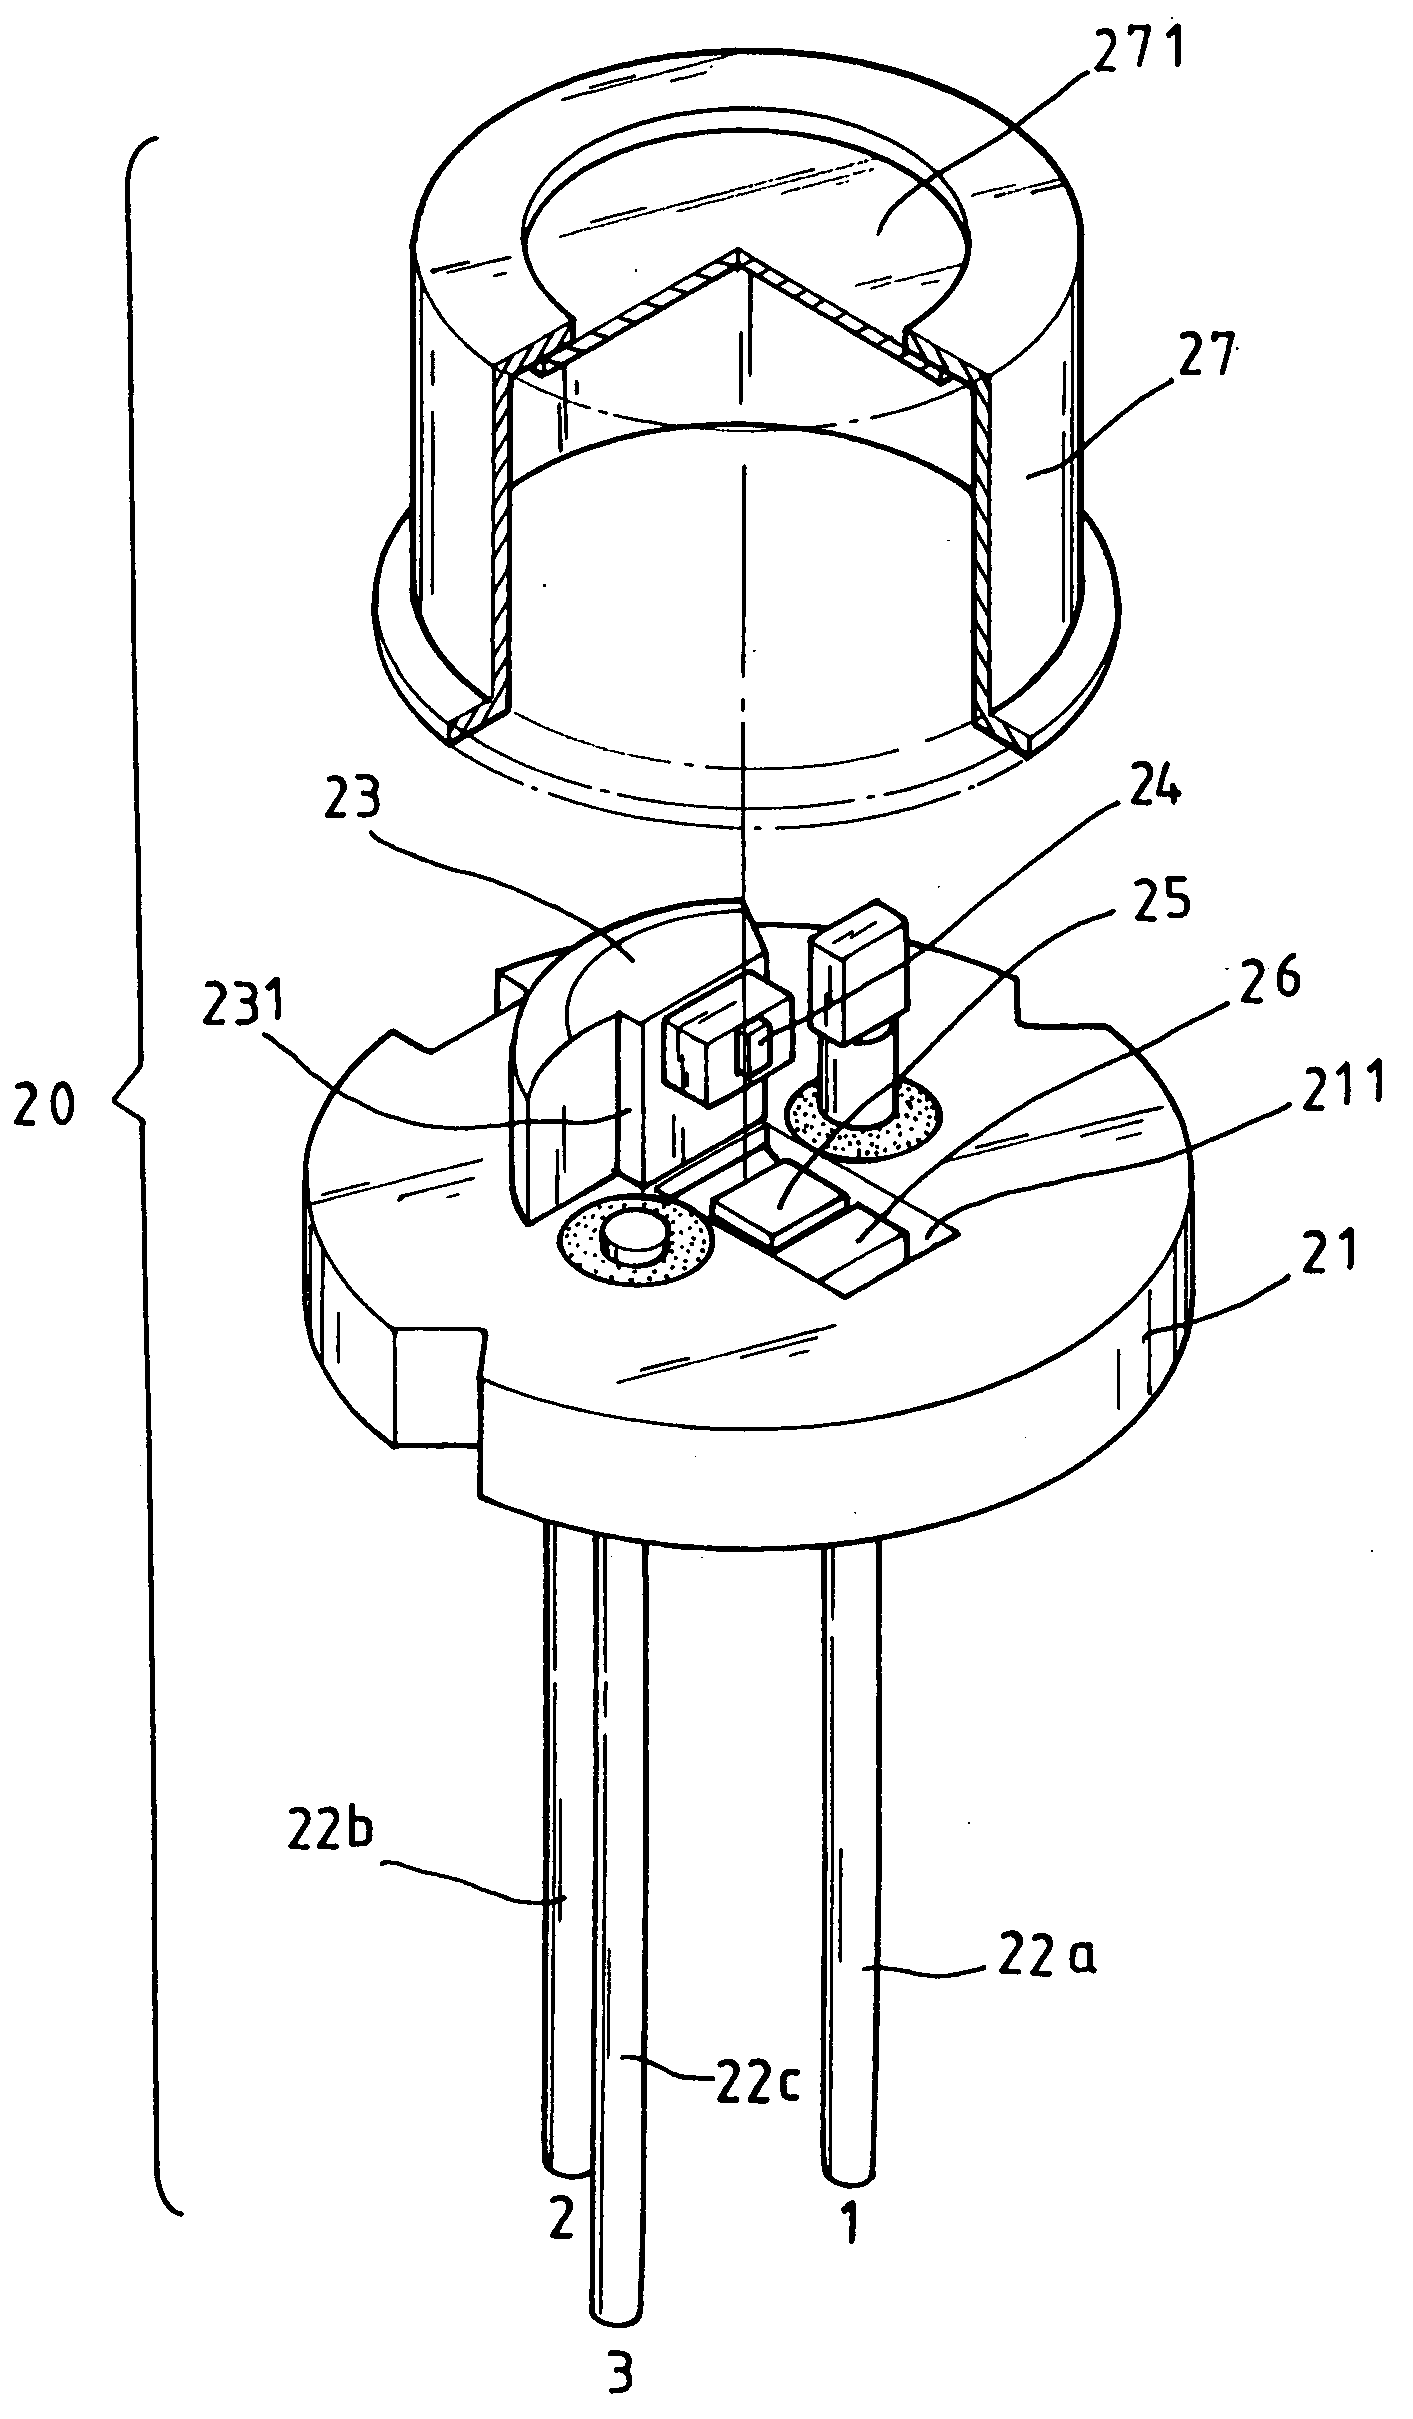 Laser diode device